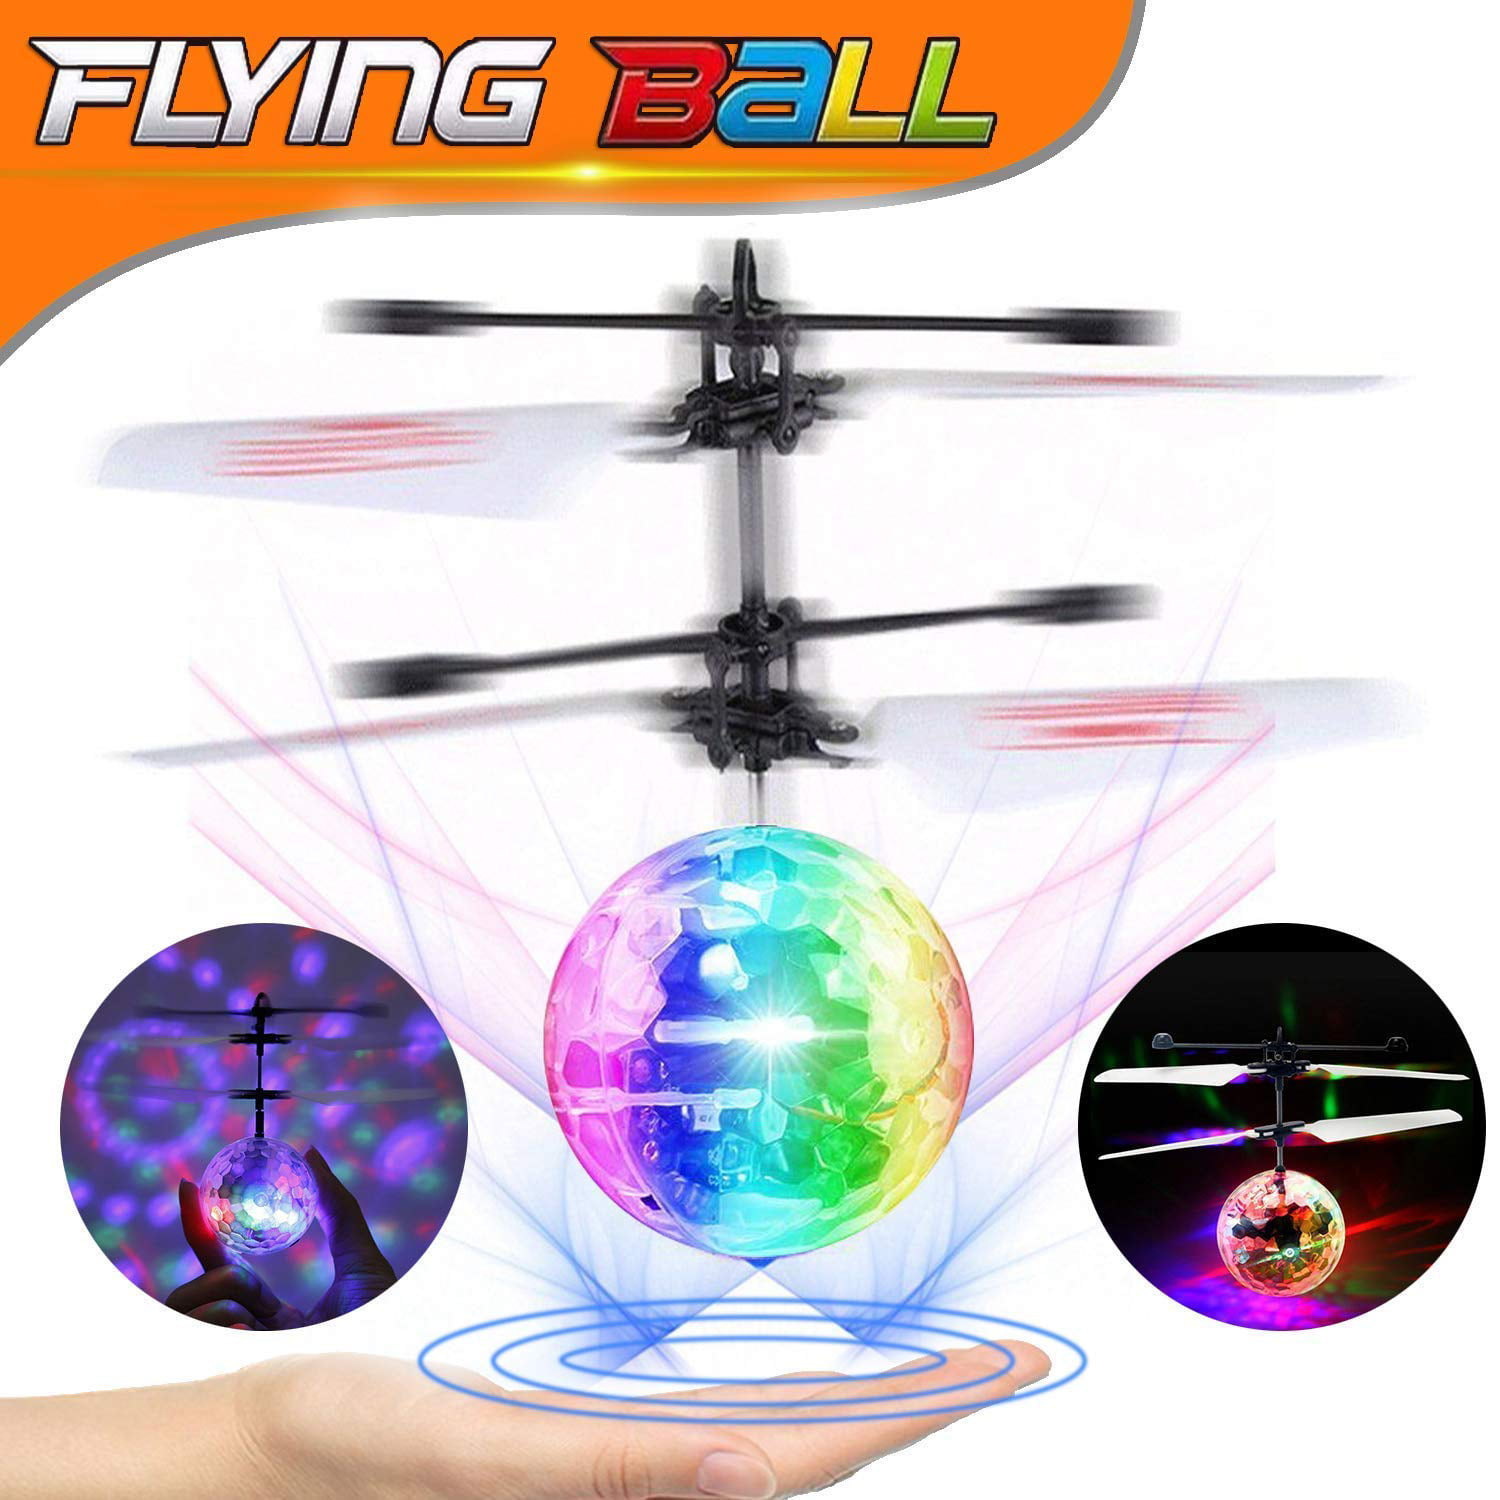 GBD 2 Pack RC Flying Ball Toys for Kids Boys Girls Teens Holiday Birthday Gifts Light Up Ball Drone Infrared Induction RC Helicopter with Remote Controller for Indoor and Outdoor Games